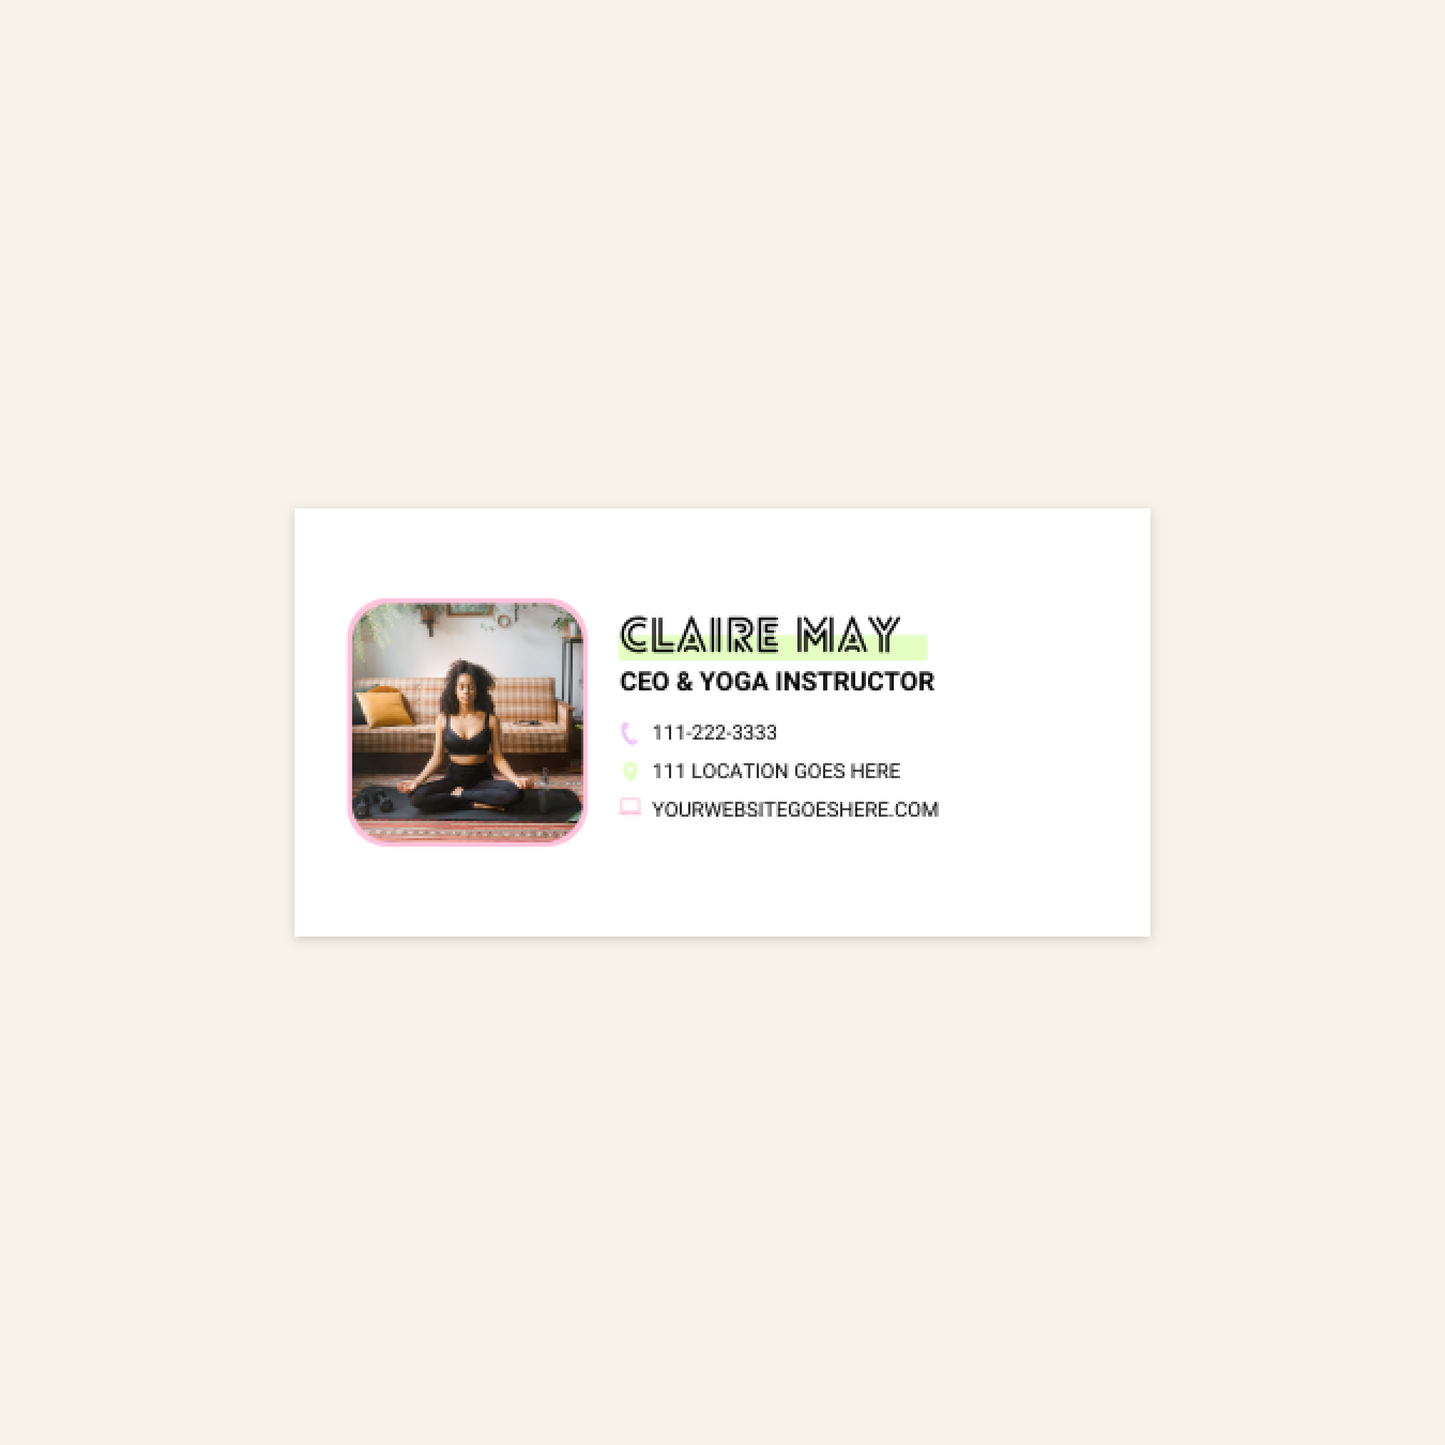 Claire - Email Signature Template